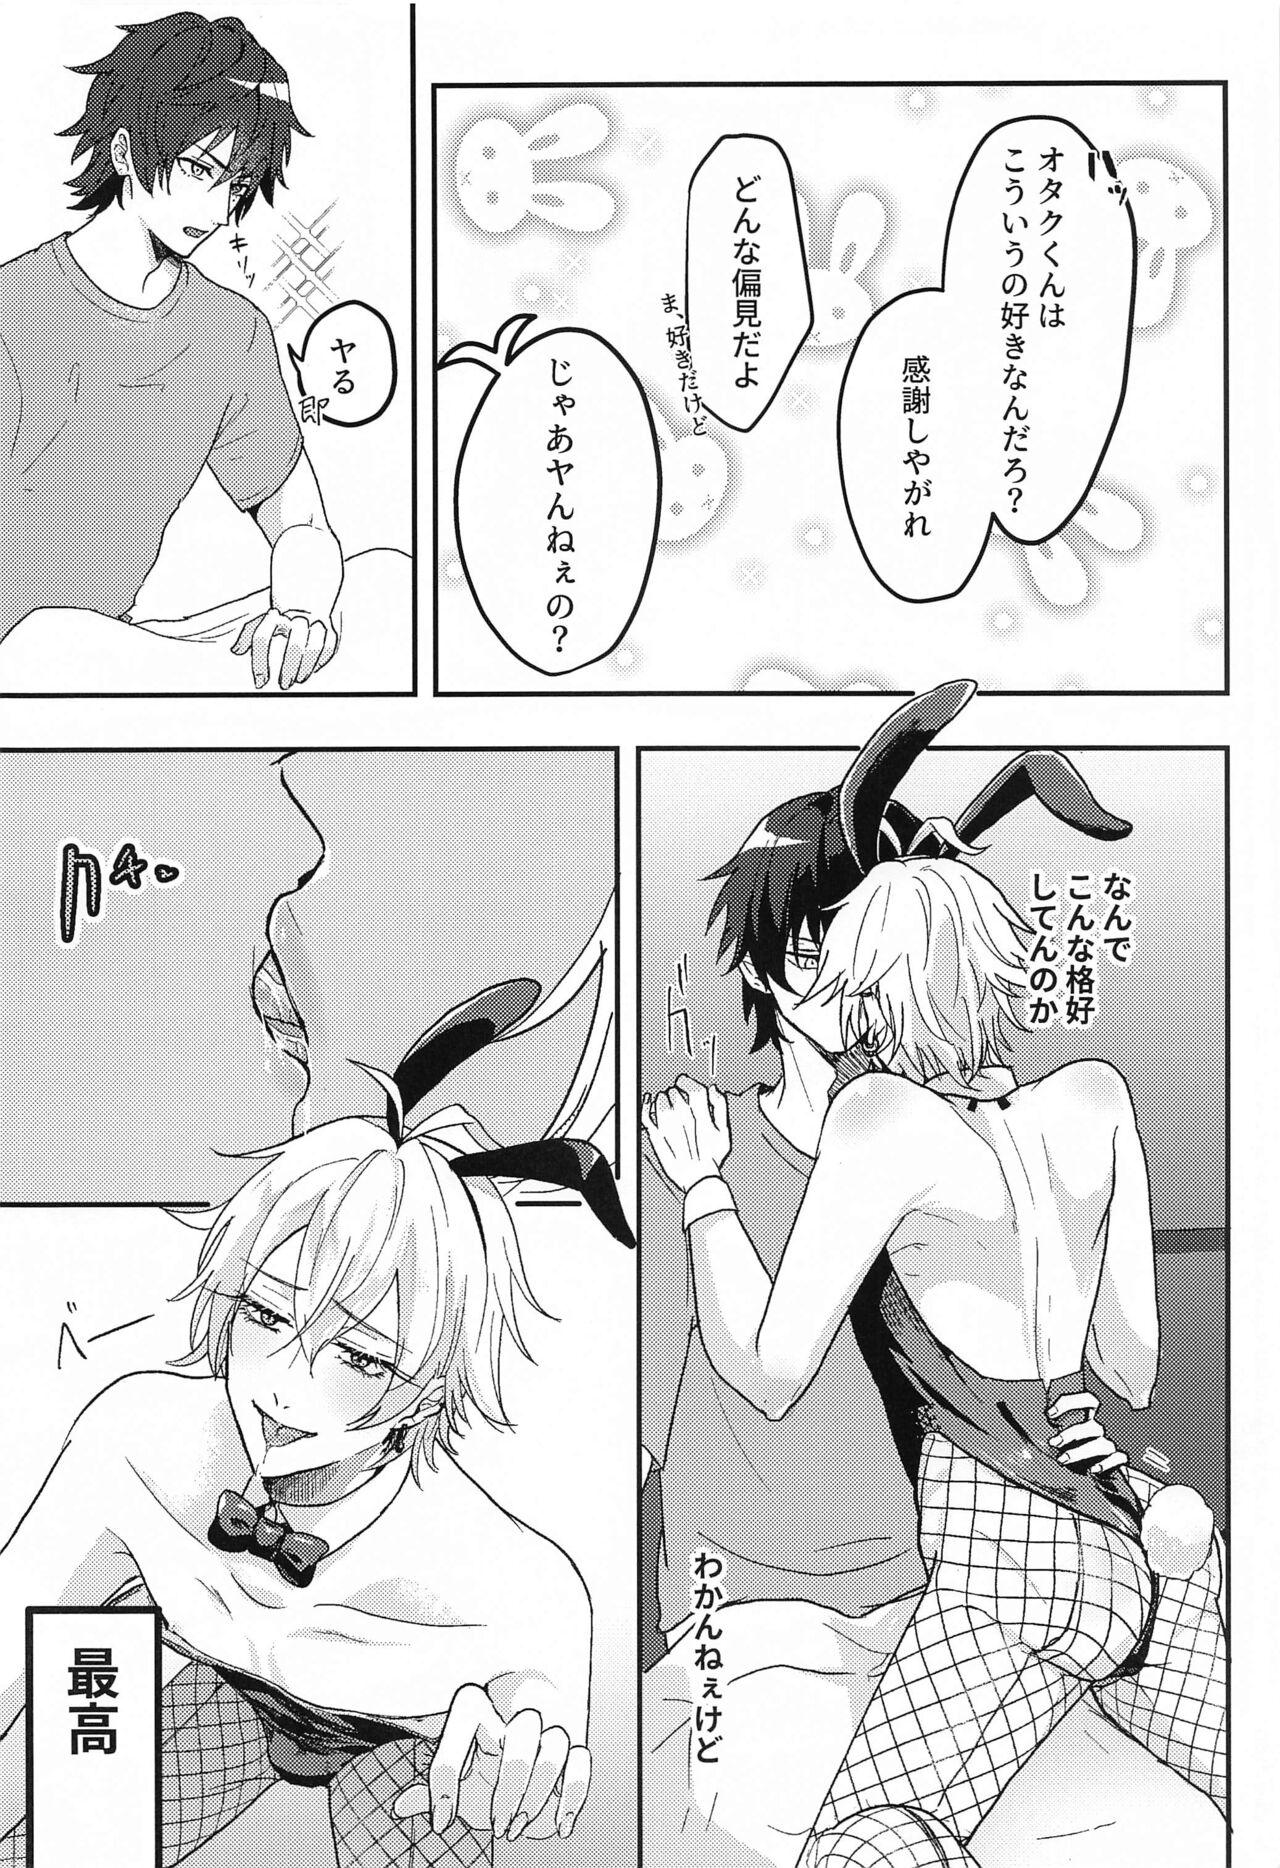 Teensex Bunny - Hypnosis mic Colombia - Page 5